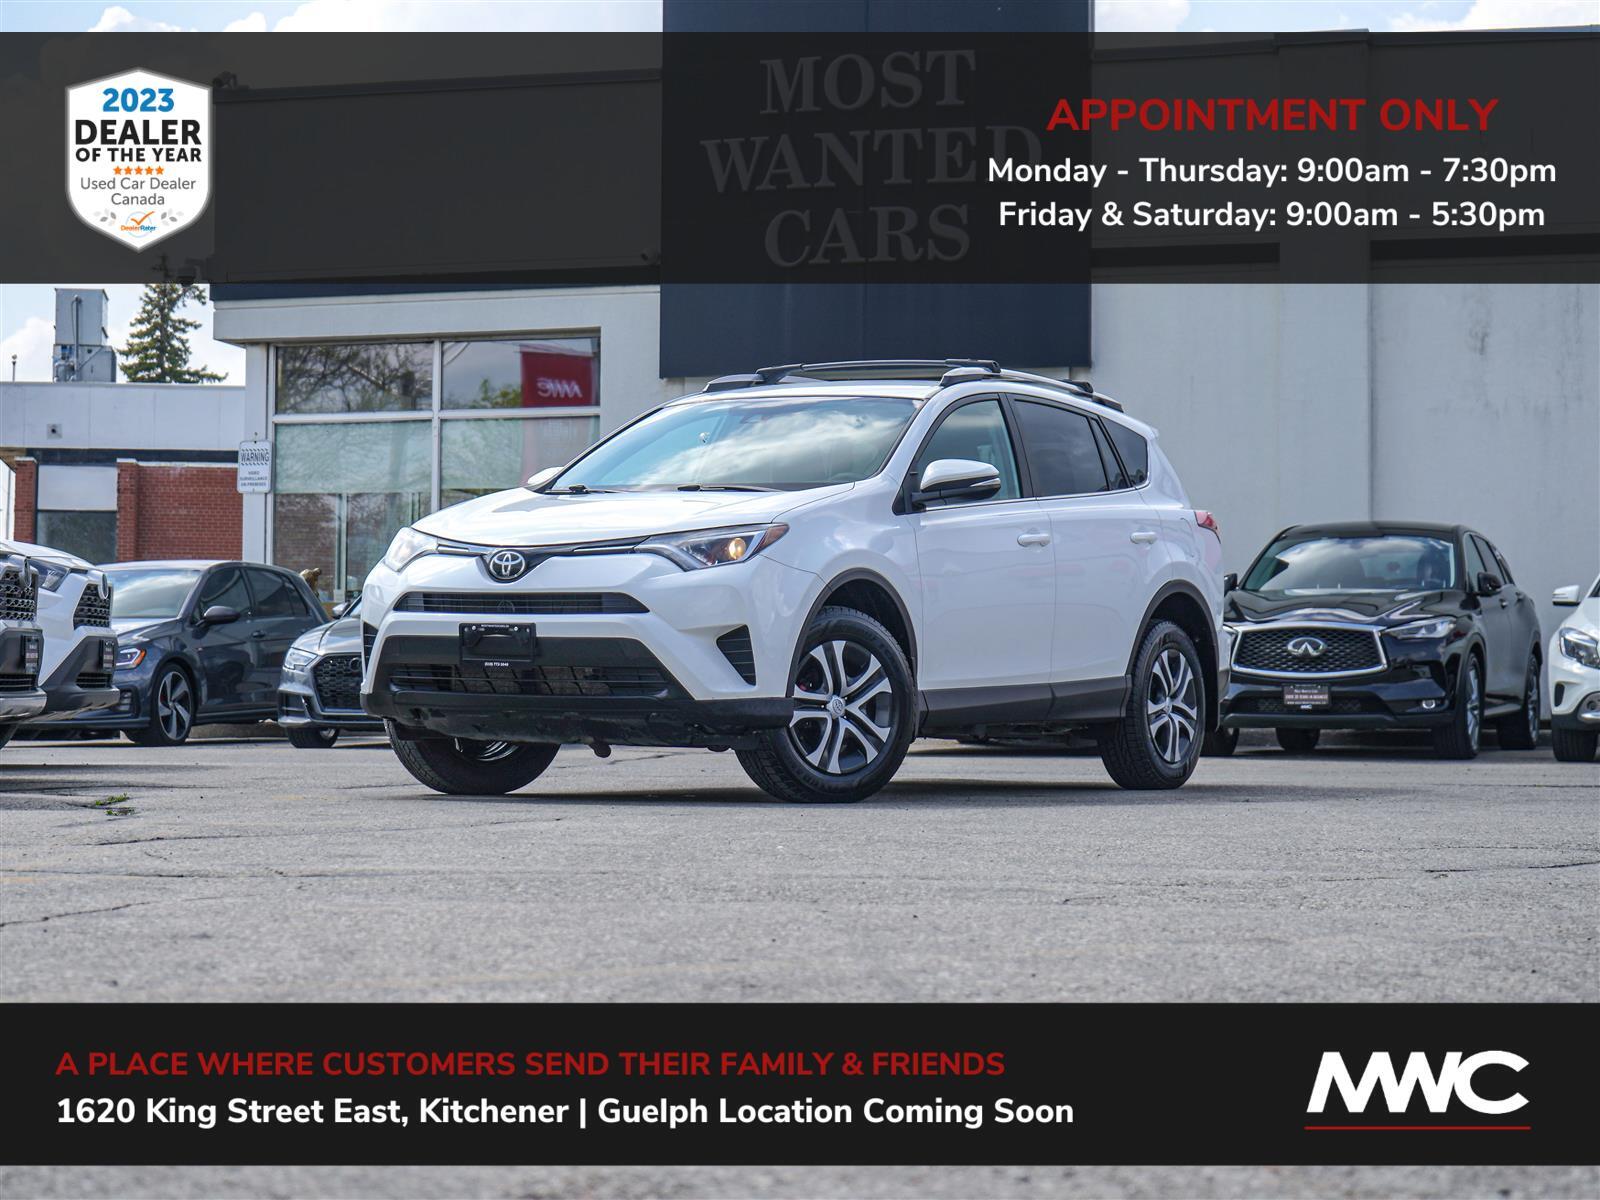 2017 Toyota RAV4 LE | AWD | 17 IN GUELPH, BY APPT. ONLY